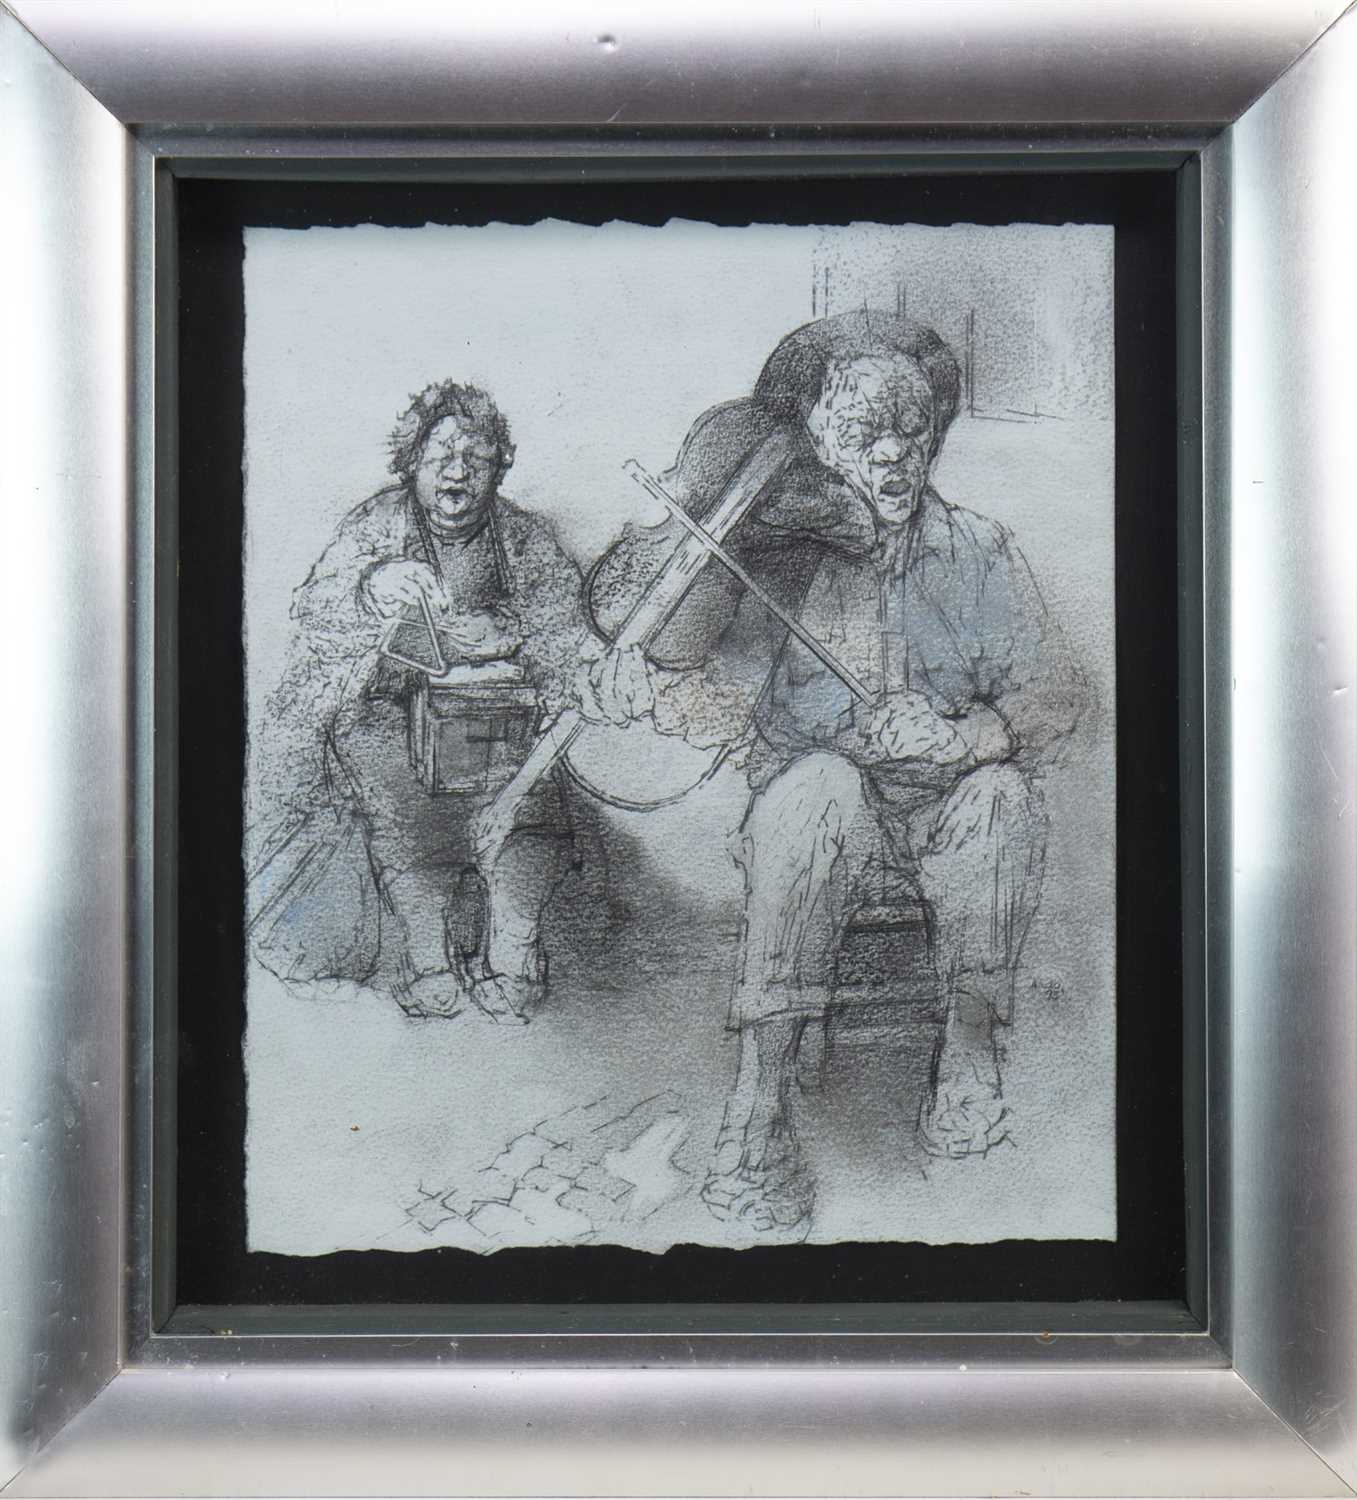 Lot 540 - BLIND MUSICIANS, FADO SINGERS, A MIXED MEDIA BY ANDA PATERSON